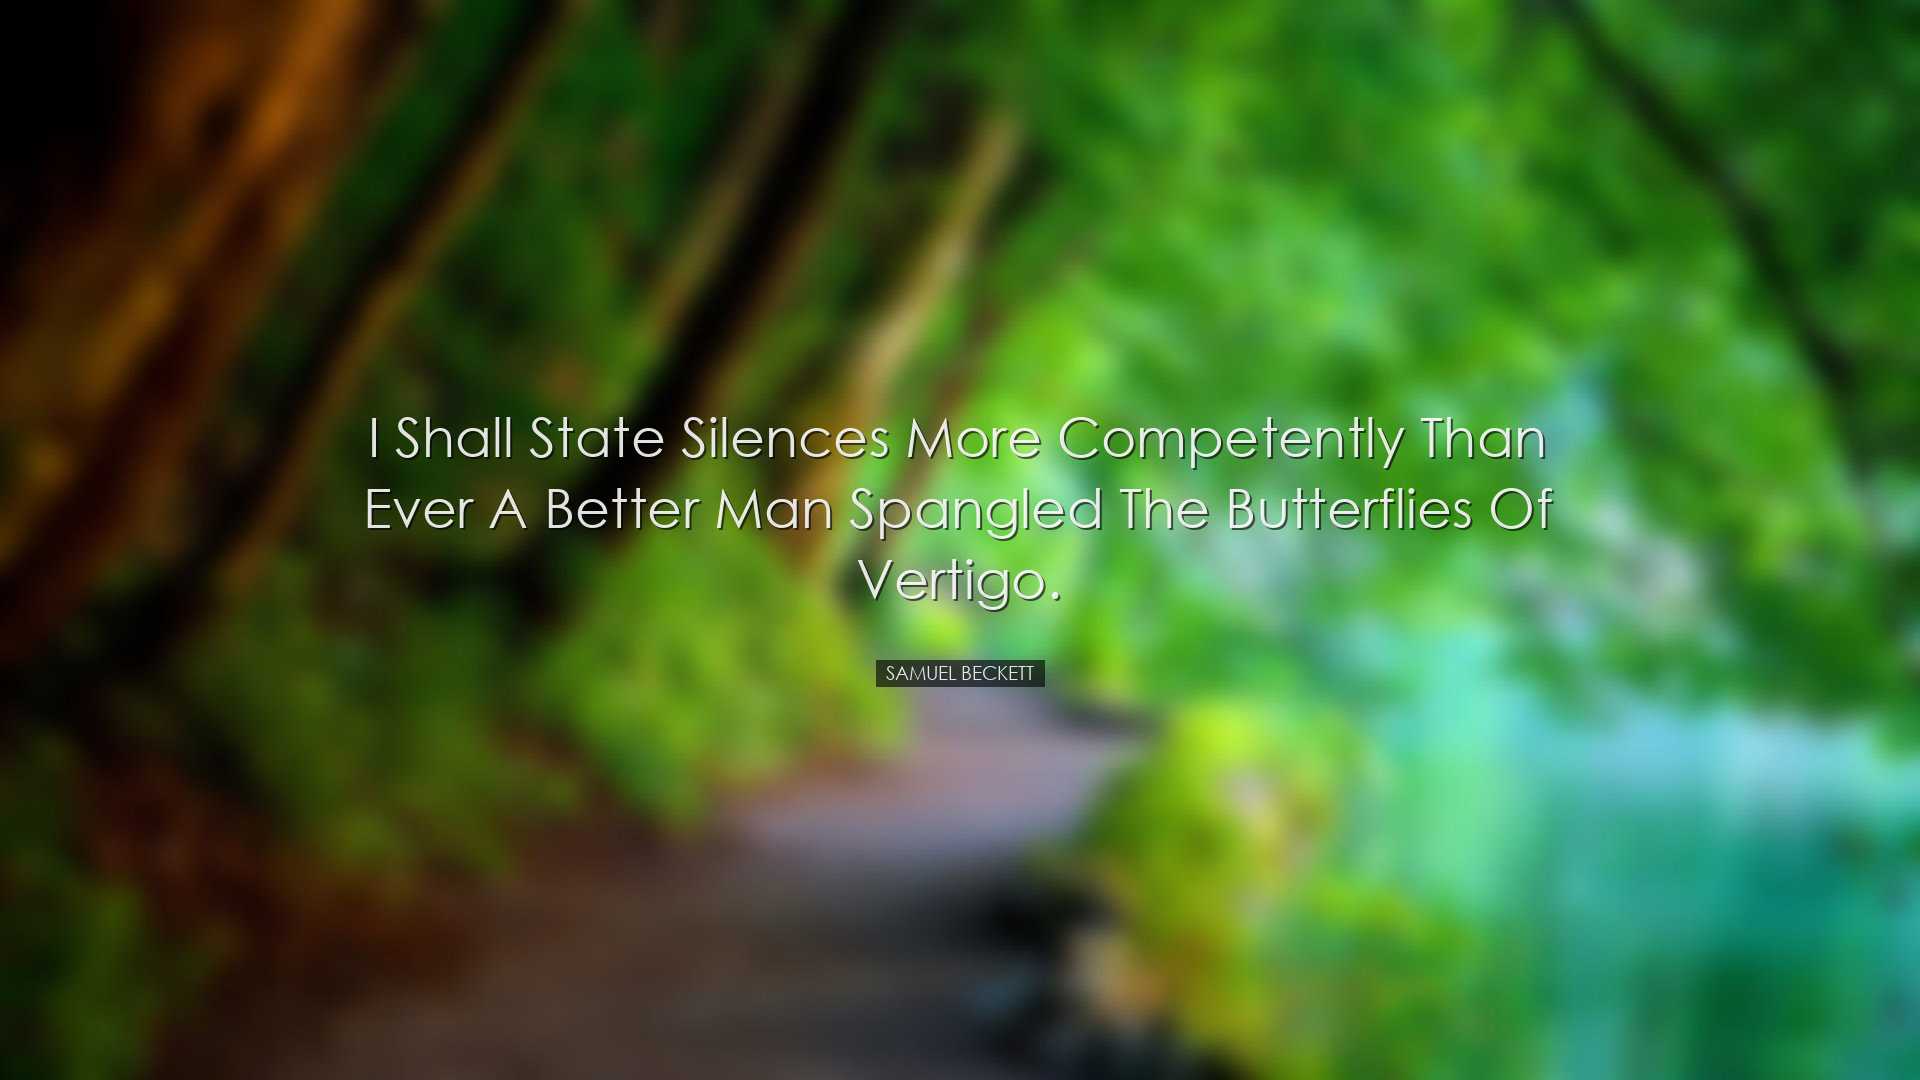 I shall state silences more competently than ever a better man spa